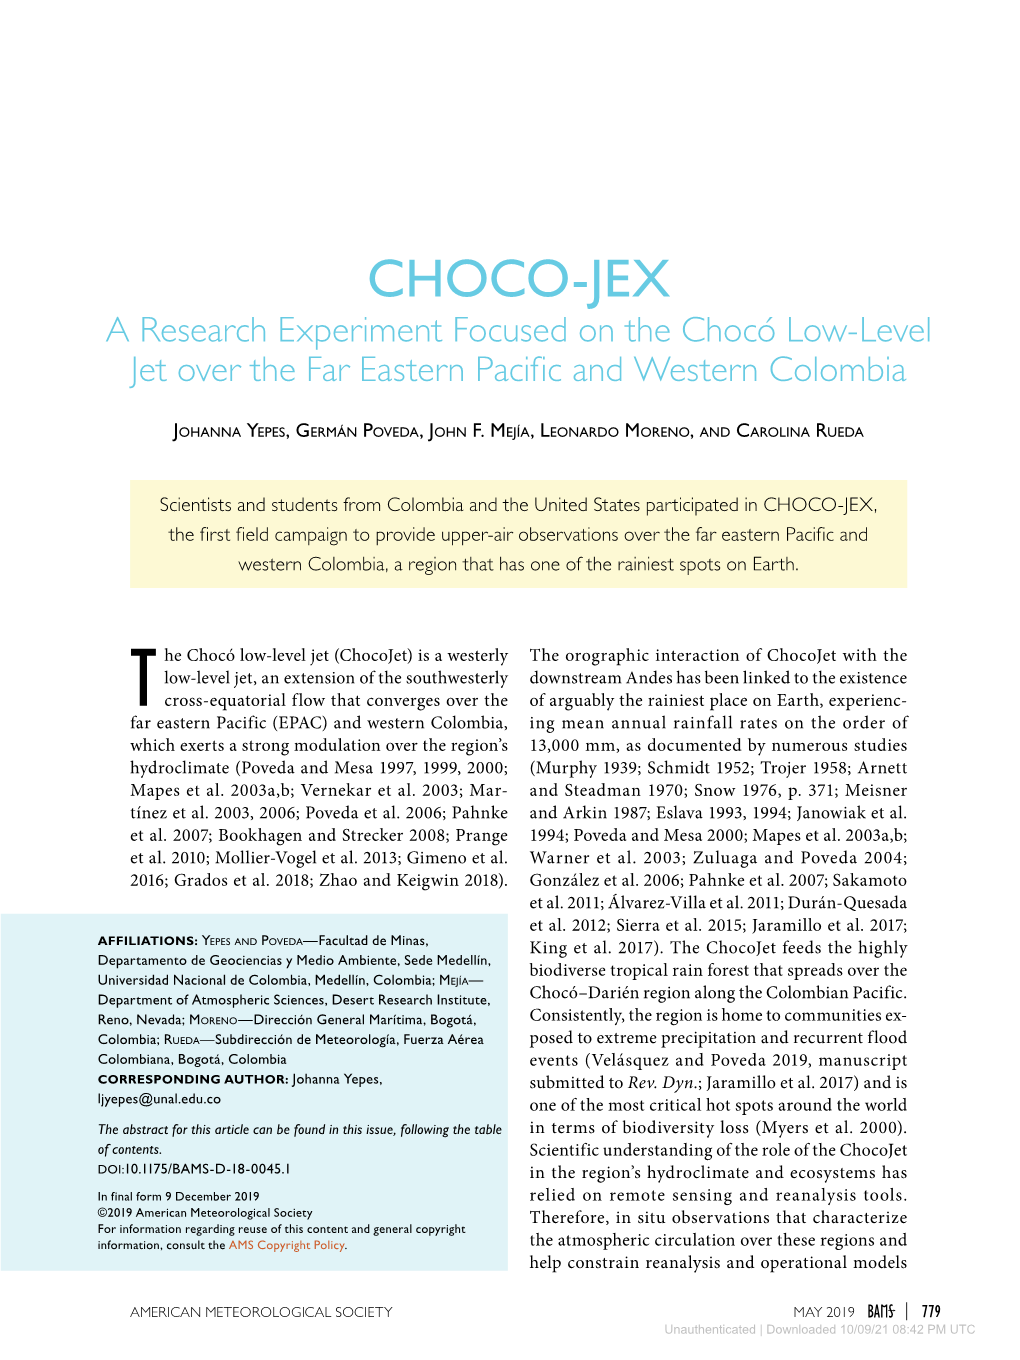 CHOCO-JEX a Research Experiment Focused on the Chocó Low-Level Jet Over the Far Eastern Pacific and Western Colombia